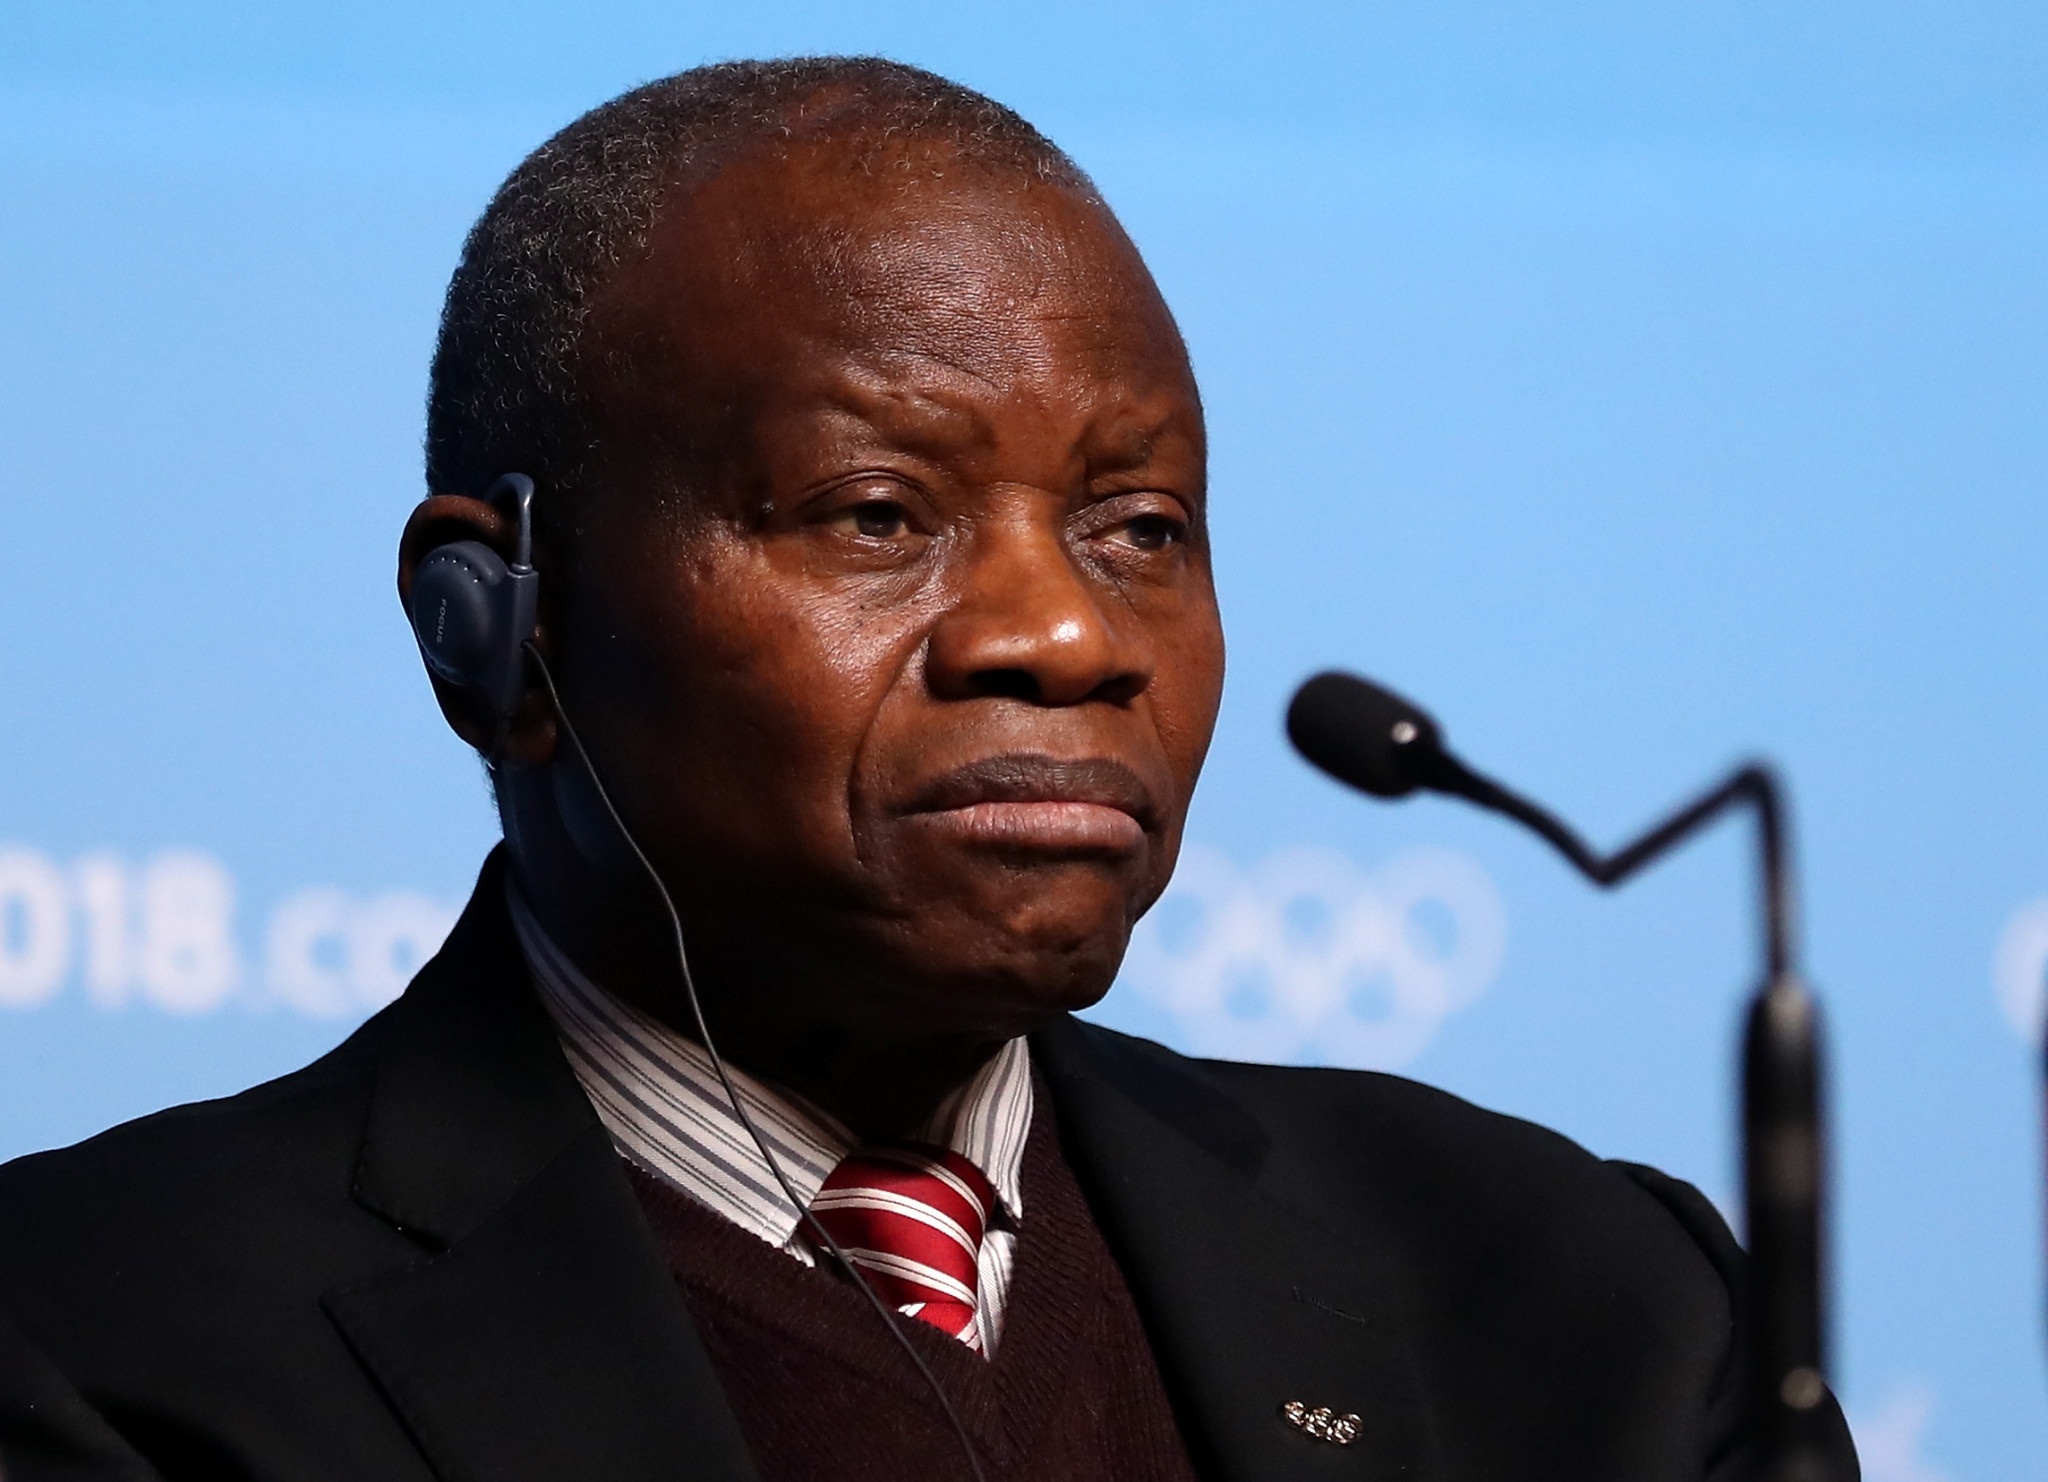 Nigeria Olympic Committee chief rallies athletes with "we are here to win" vow